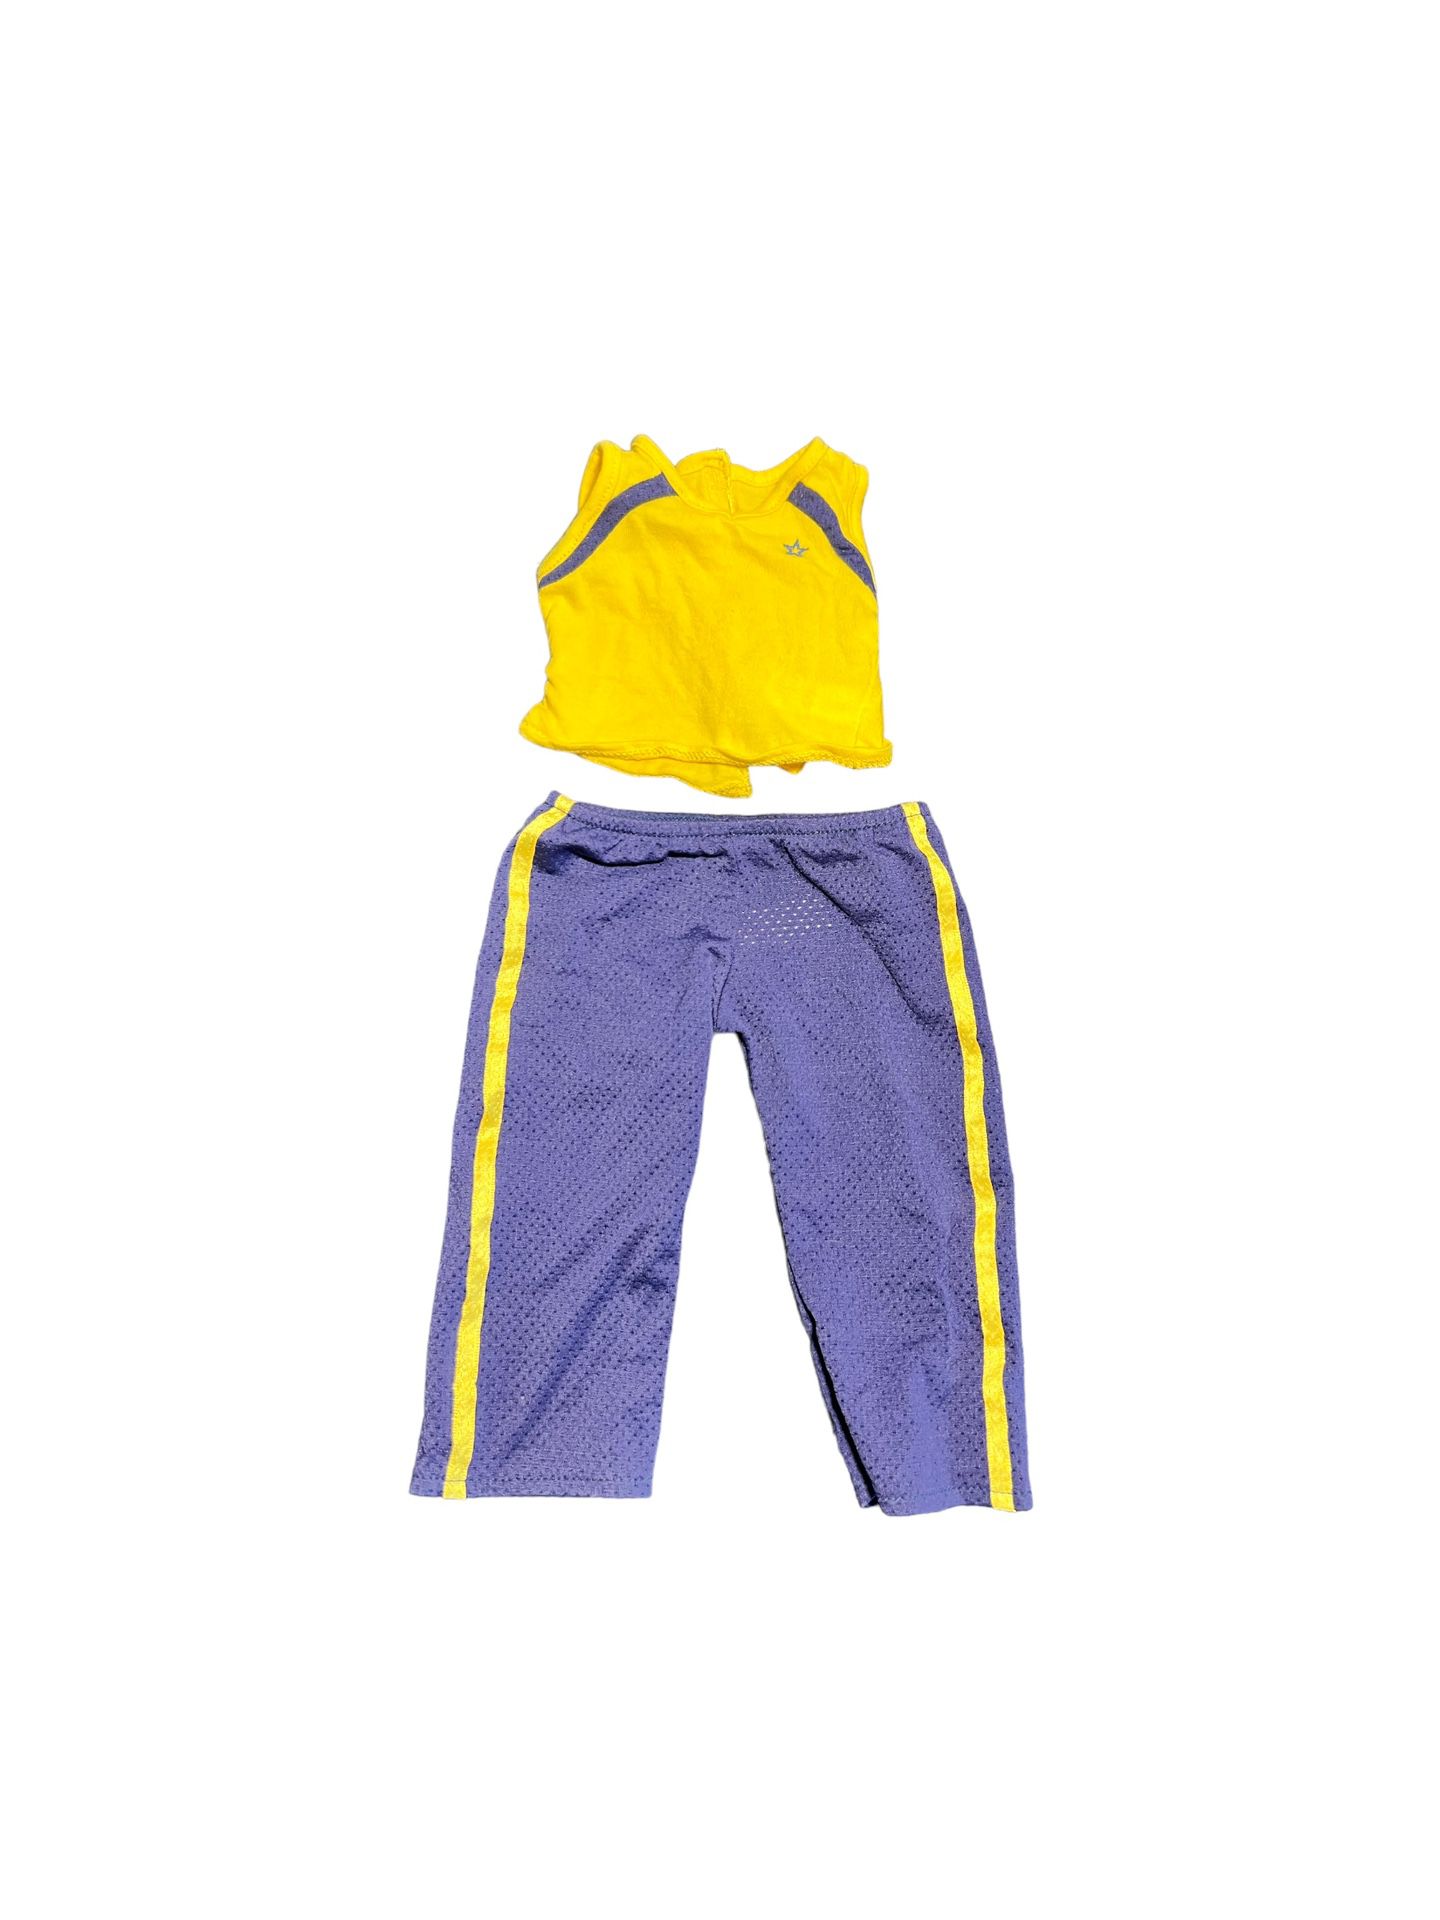 American Girl Doll Two in One Running Outfit Pants Shirt ONLY